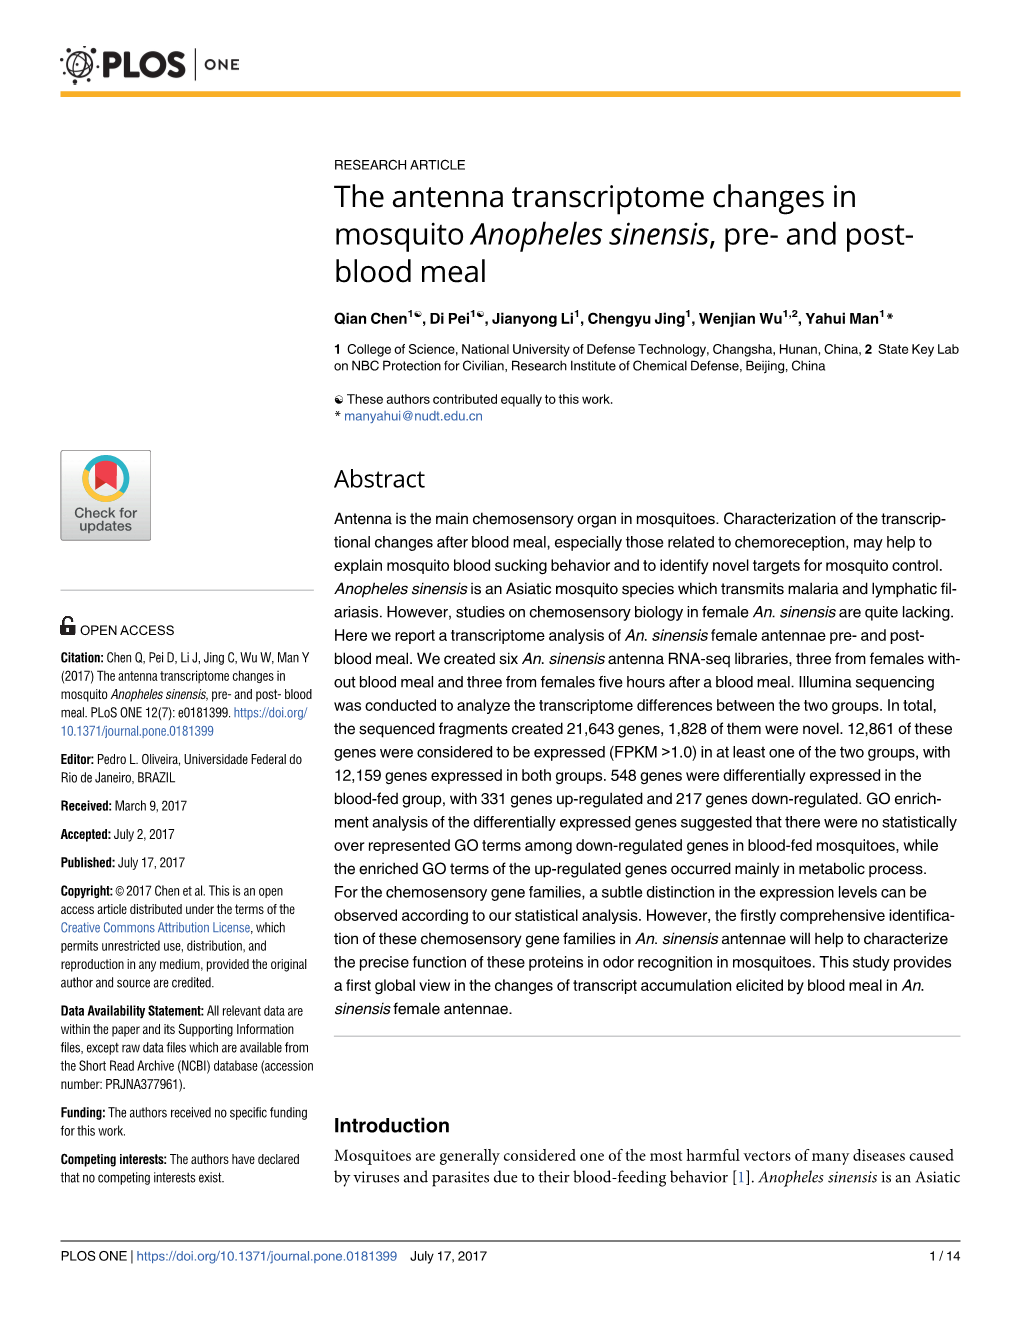 The Antenna Transcriptome Changes in Mosquito Anopheles Sinensis, Pre- and Post- Blood Meal